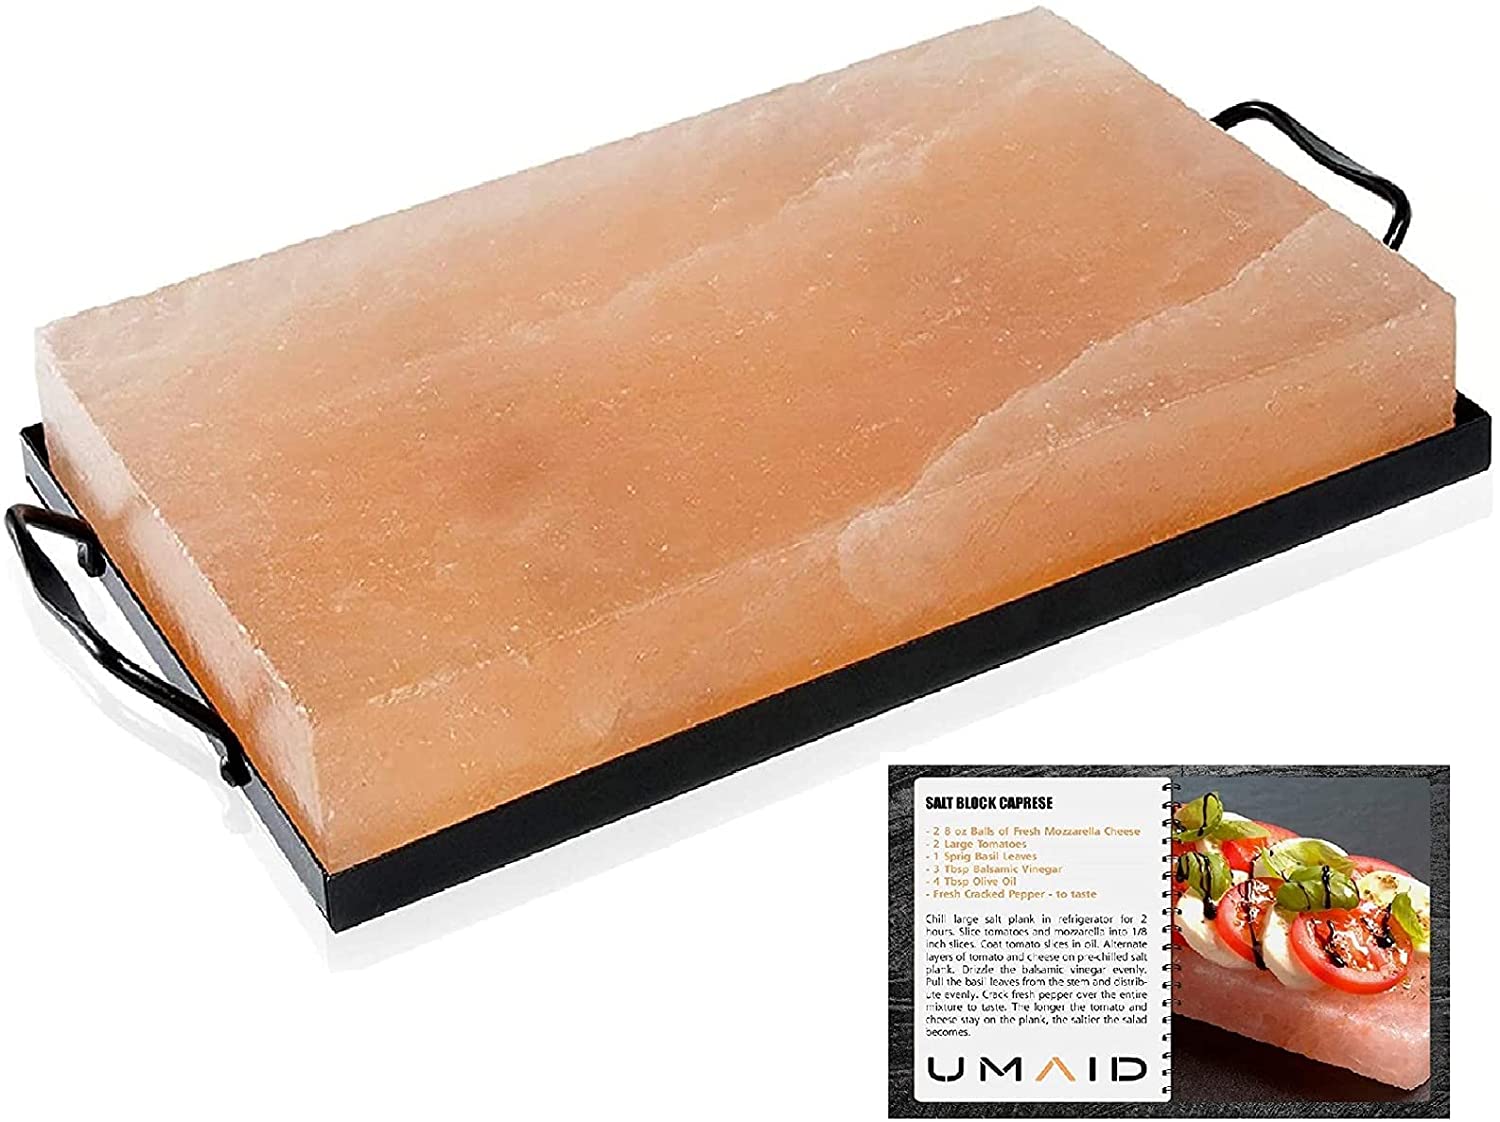 Natural Himalayan Rock Salt Block Cooking Plate 12 X 8 X 1.5 for Cooking, Grilling, Cutting and Serving with Metal Steel Tray Set